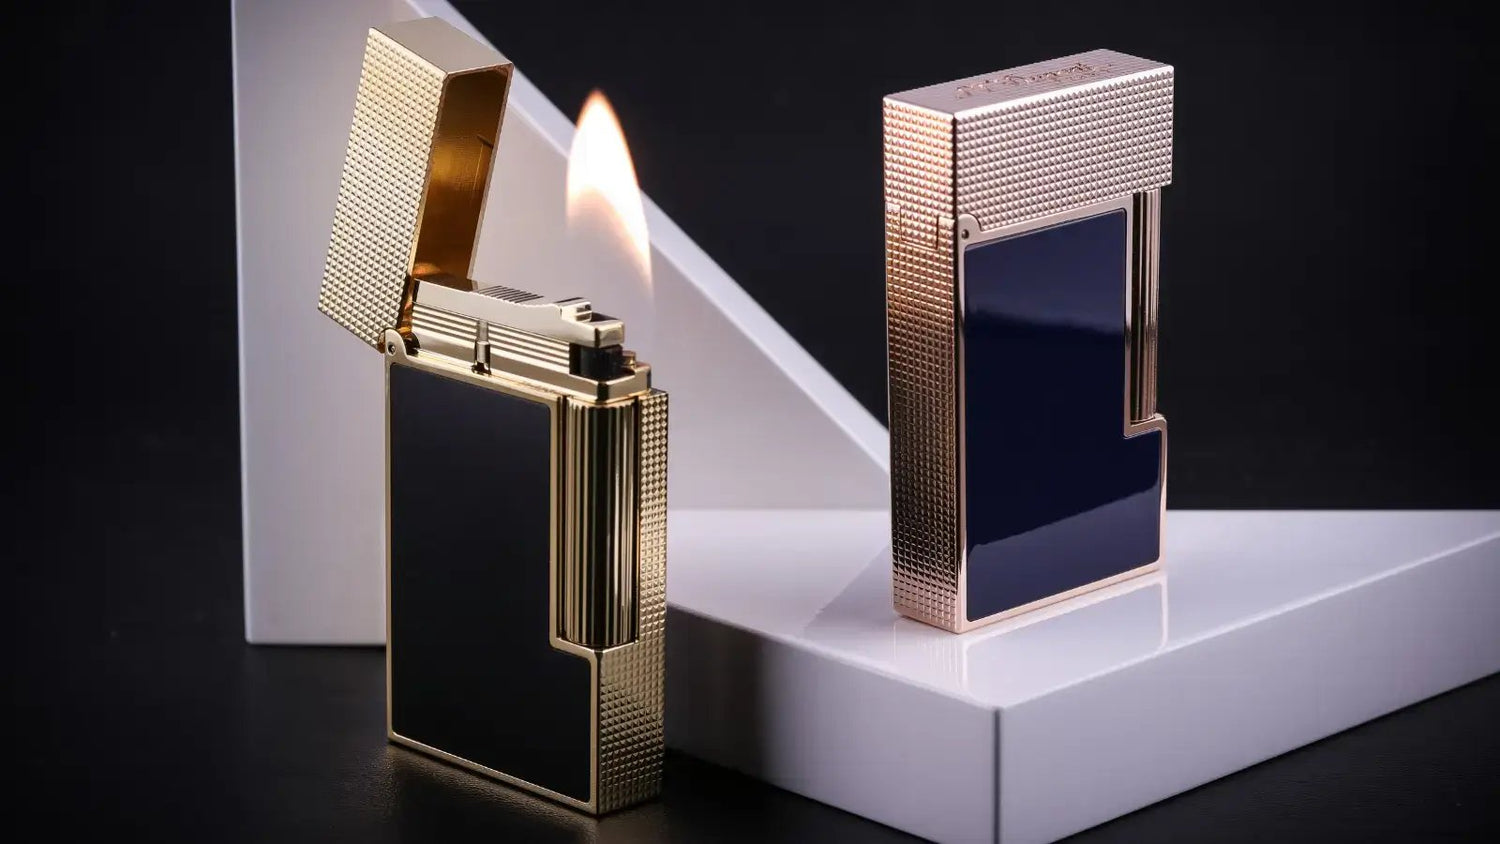 S.T. Dupont LIgne 2 lighters with matte black lacquer and gold finish, and blue lacquer with rose gold finish.